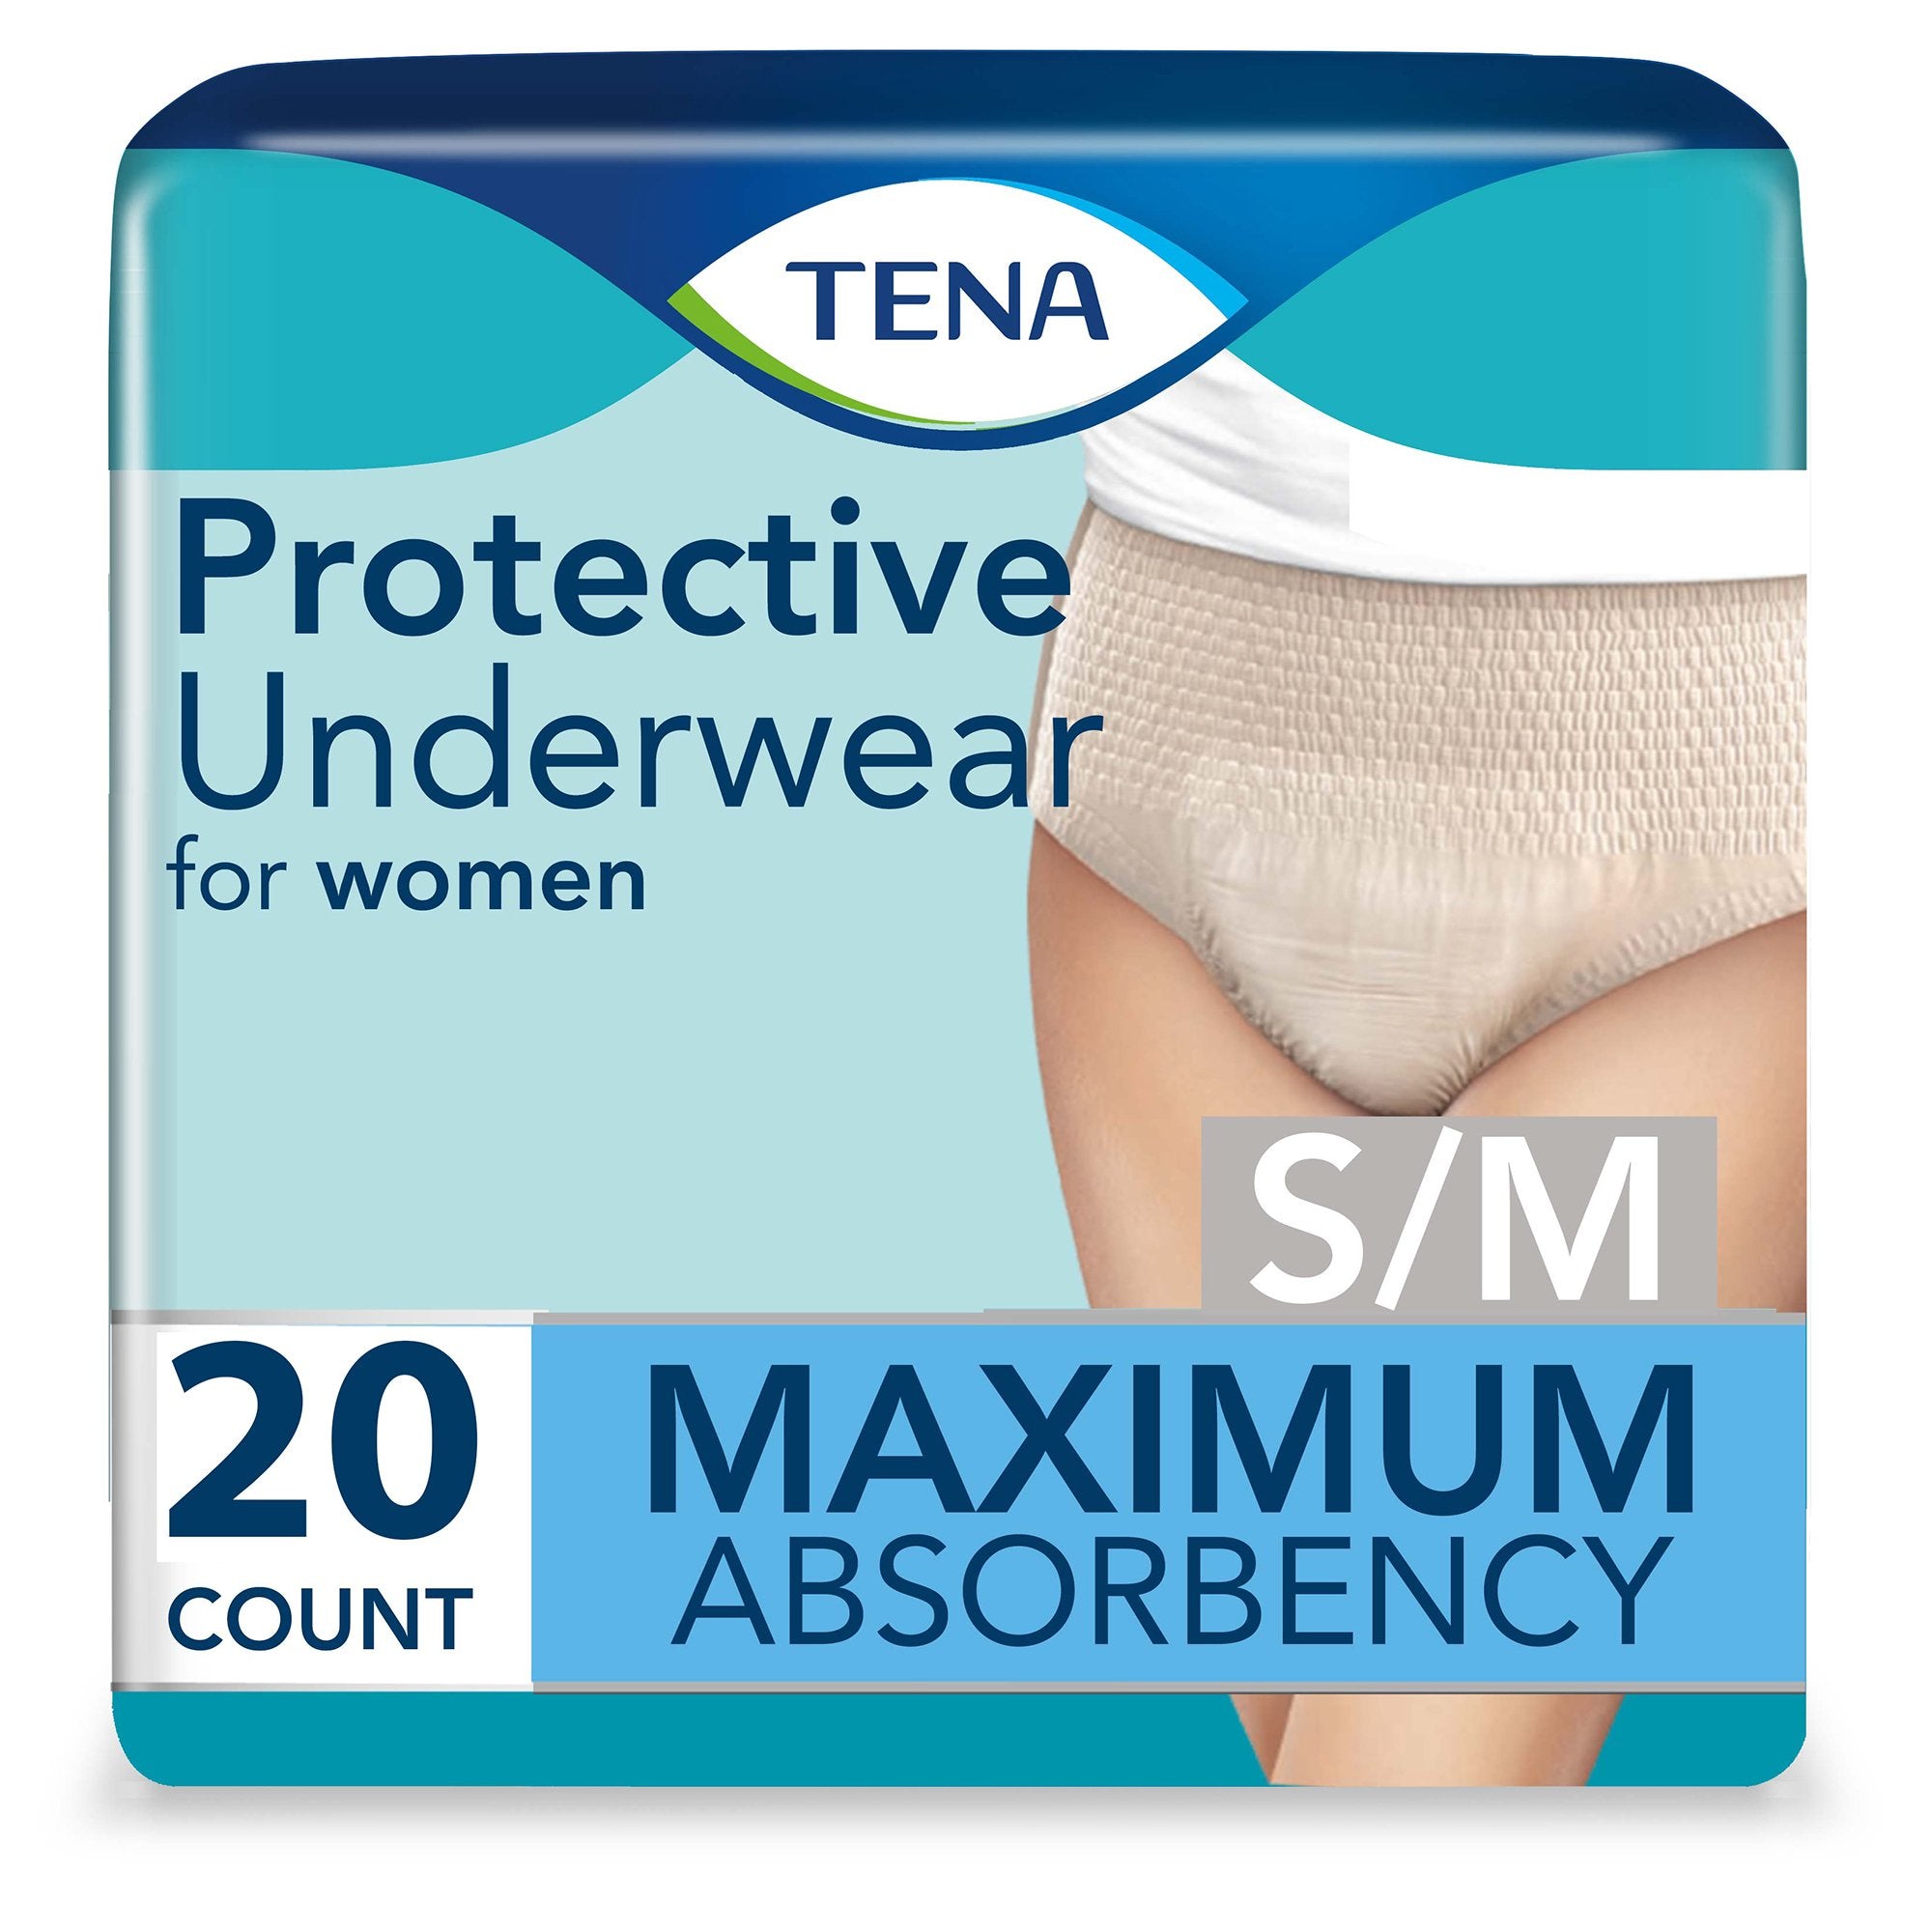 Female Adult Absorbent Underwear TENA ProSkin Protective Pull On with Tear Away Seams Small / Medium Disposable Moderate Absorbency